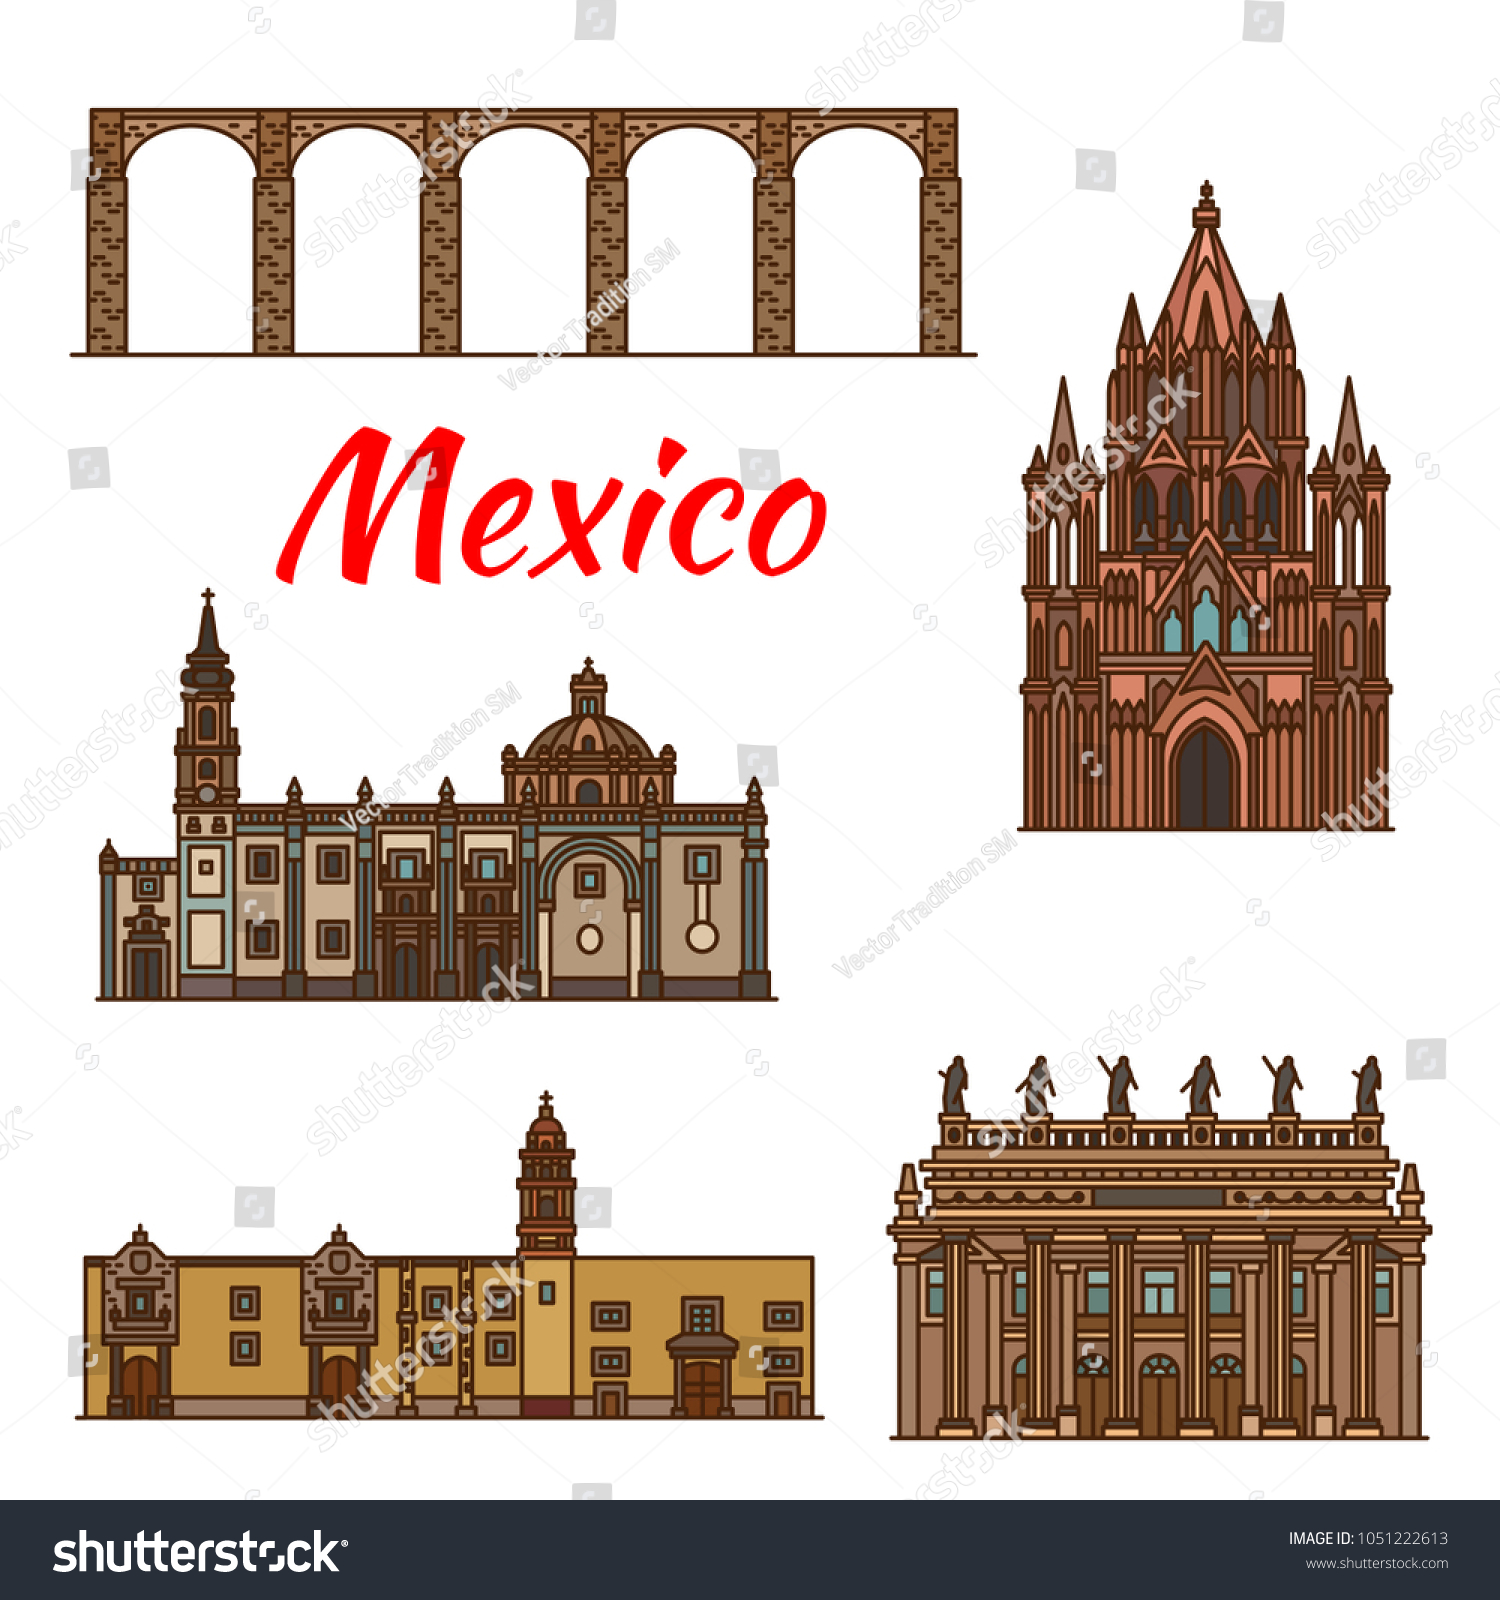 SVG of Mexico architecture landmarks and famous buildings facade line icons. Vector set of Mexican aqueduct, churches, cathedrals and monastery of Santa Rosa de Viterbo and Juarez theater in Guanajuato svg